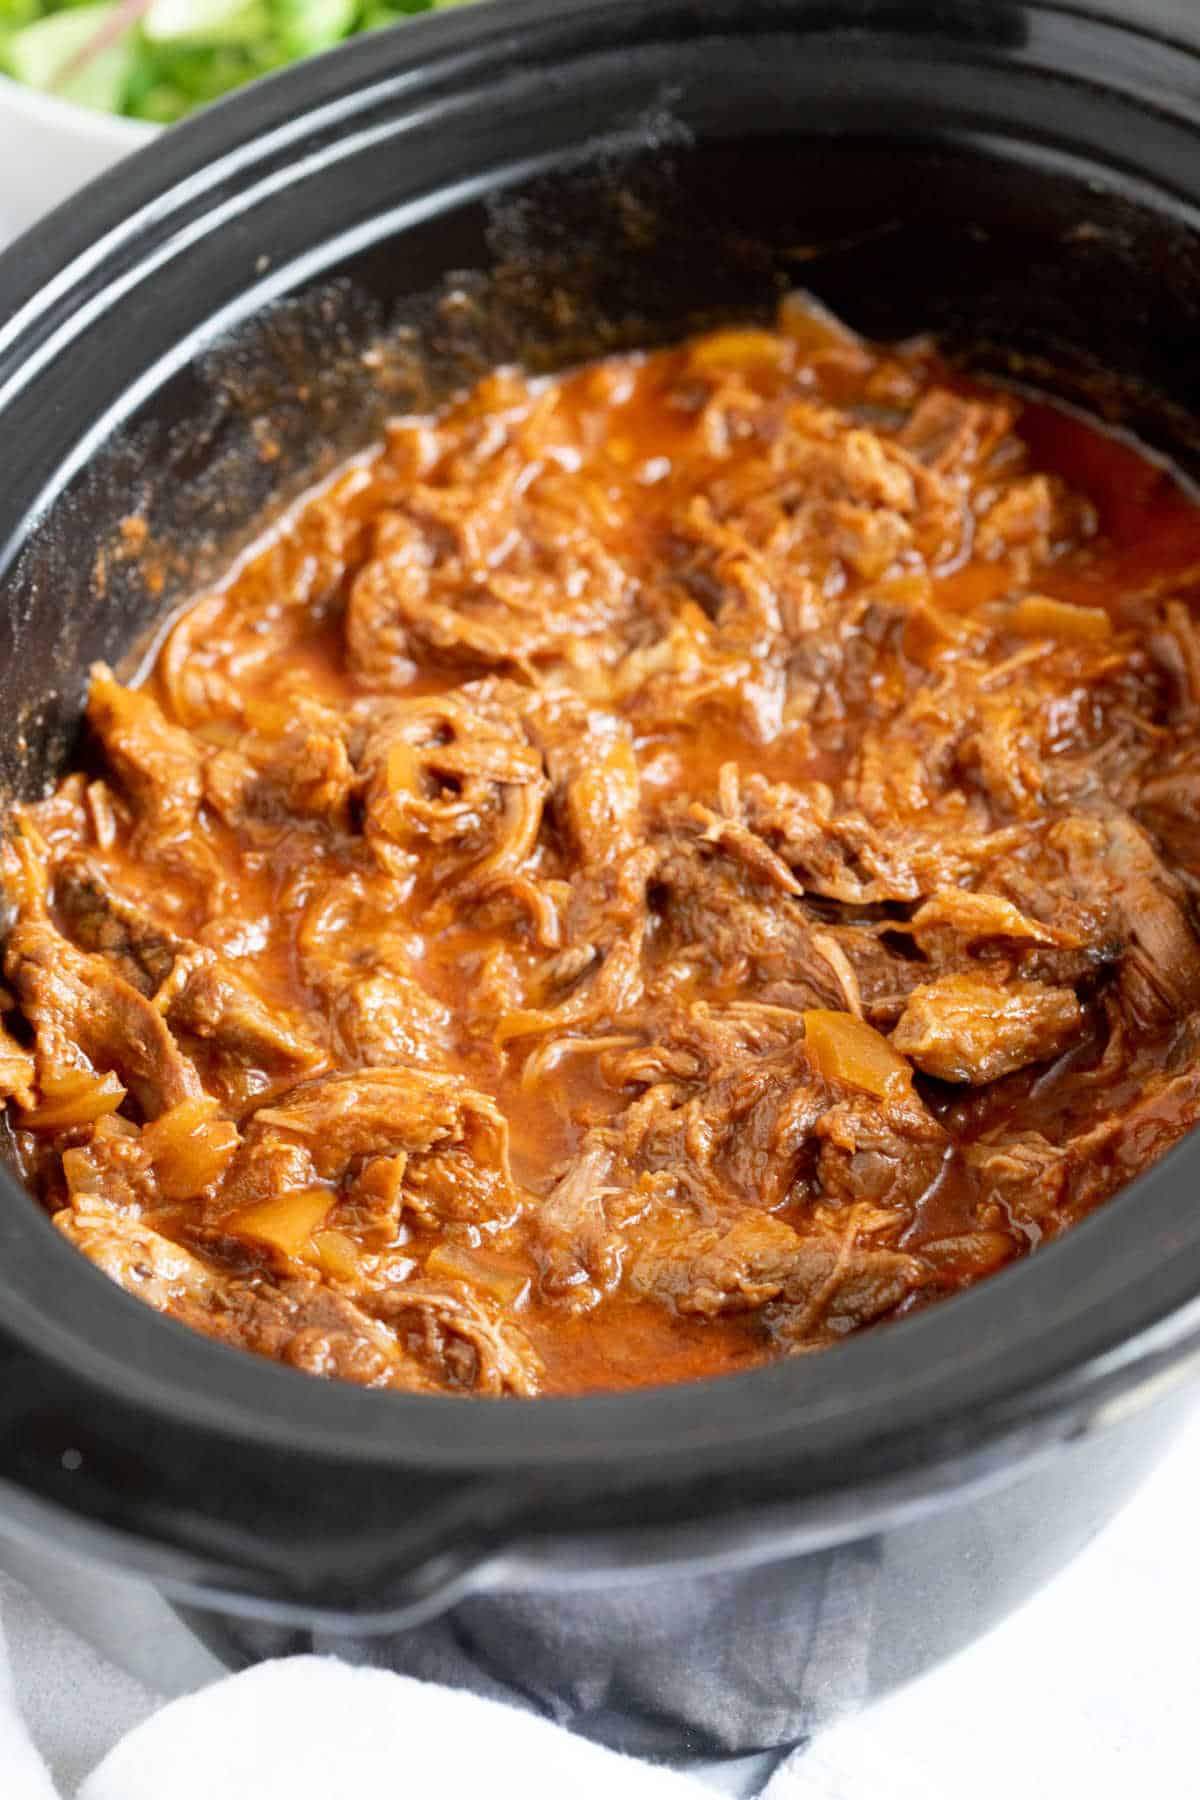 BBQ shredded beef in a slow cooker.